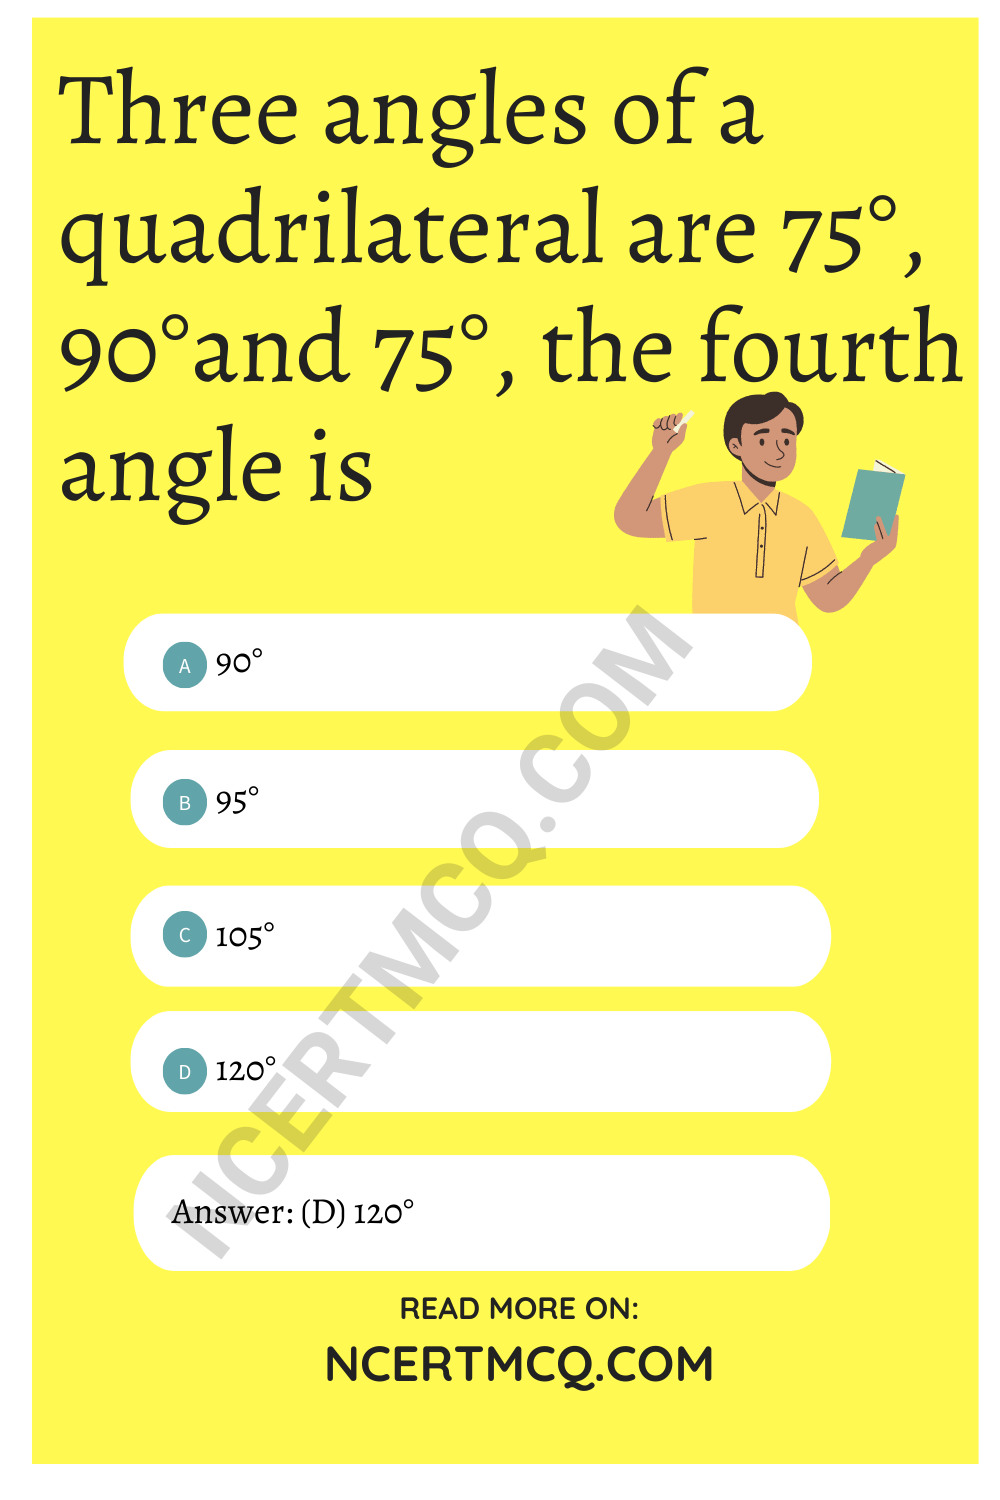 Three angles of a quadrilateral are 75°, 90°and 75°, the fourth angle is